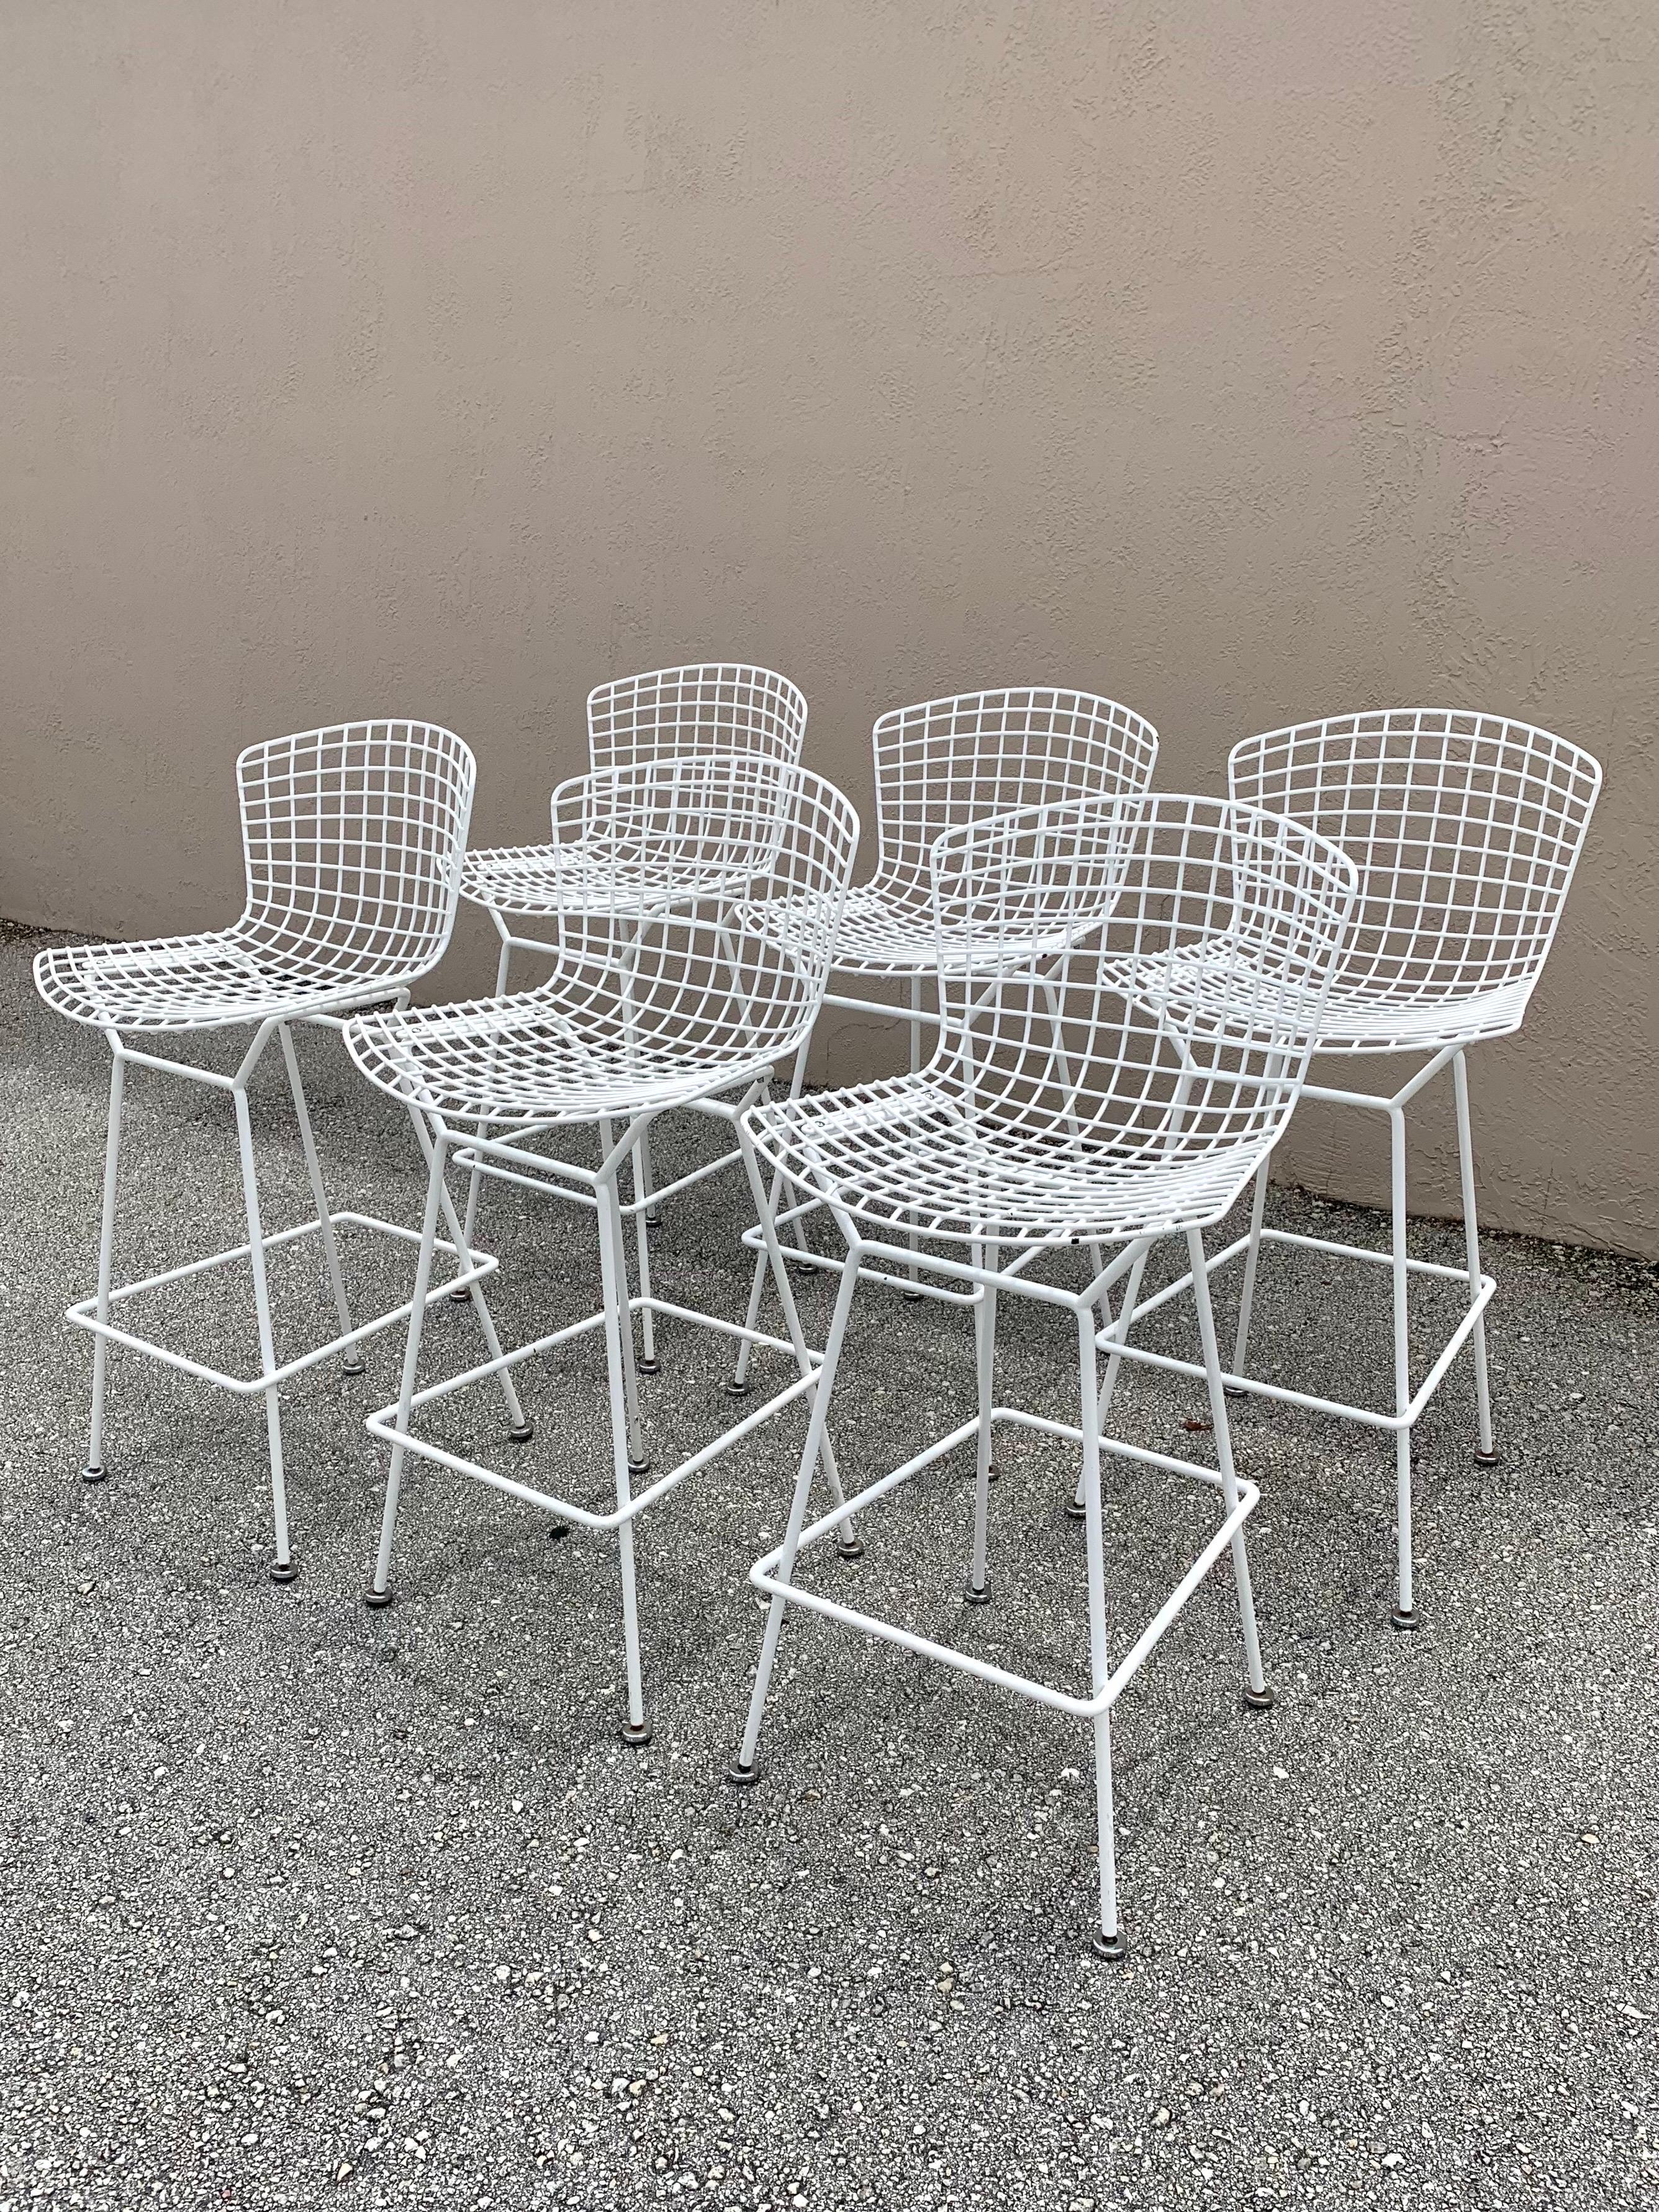 Set of 6 bar stools by Harry Bertoia for Knoll. A beautiful and classic design by one of the most notable Mid Century designer and artist. Each one retains its original white powder coating. 

There is some wear to each one. Some light some more